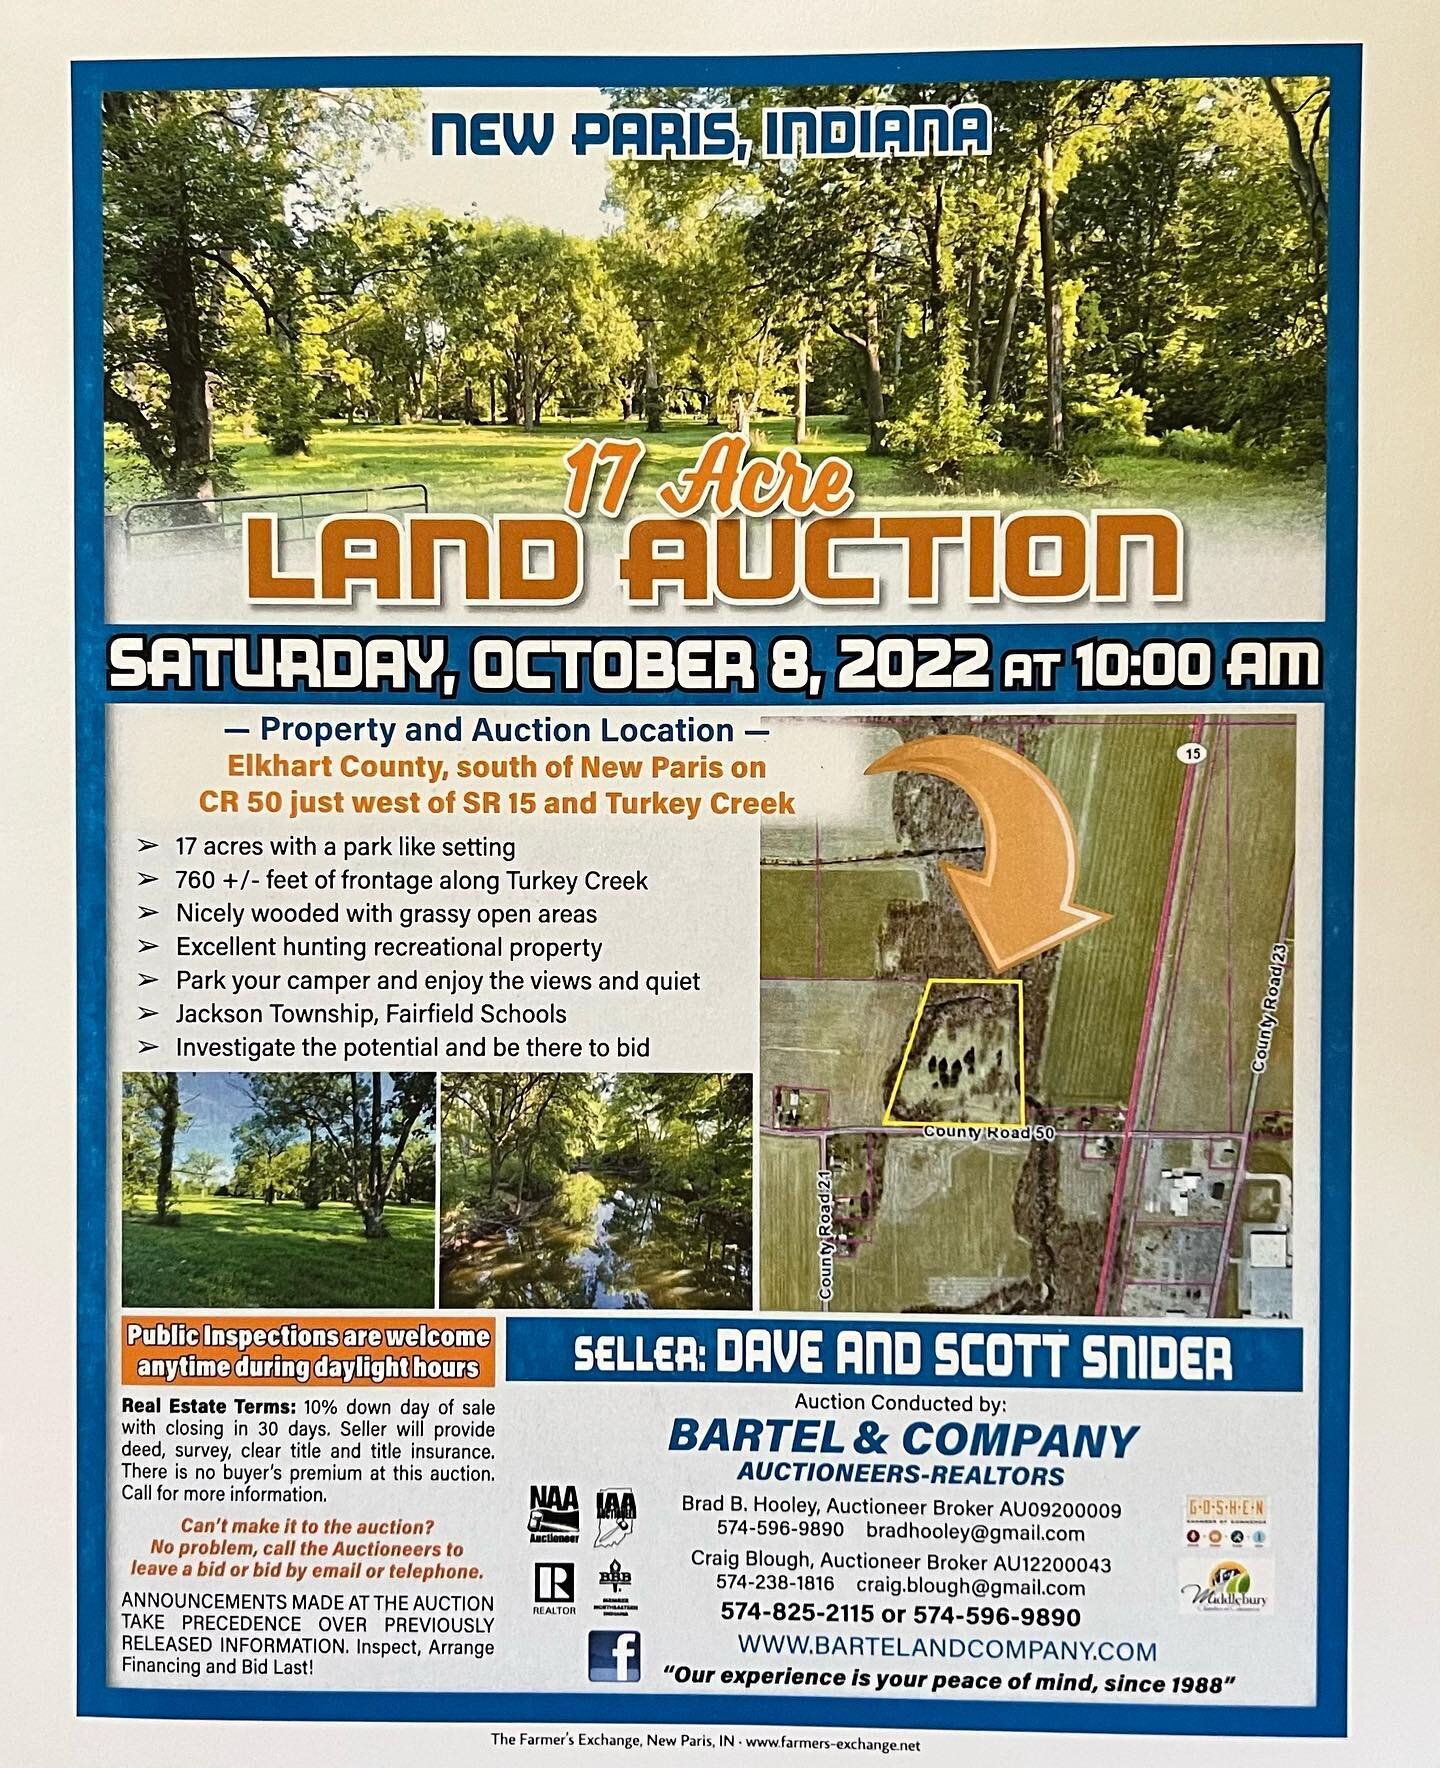 17 Acres Vacant Land New Paris, Indiana at Public Auction October 8, 2022 at 10 am. More info to come. Call Brad or Craig at Bartel &amp; Company 574-596-9890 or 574-238-1816